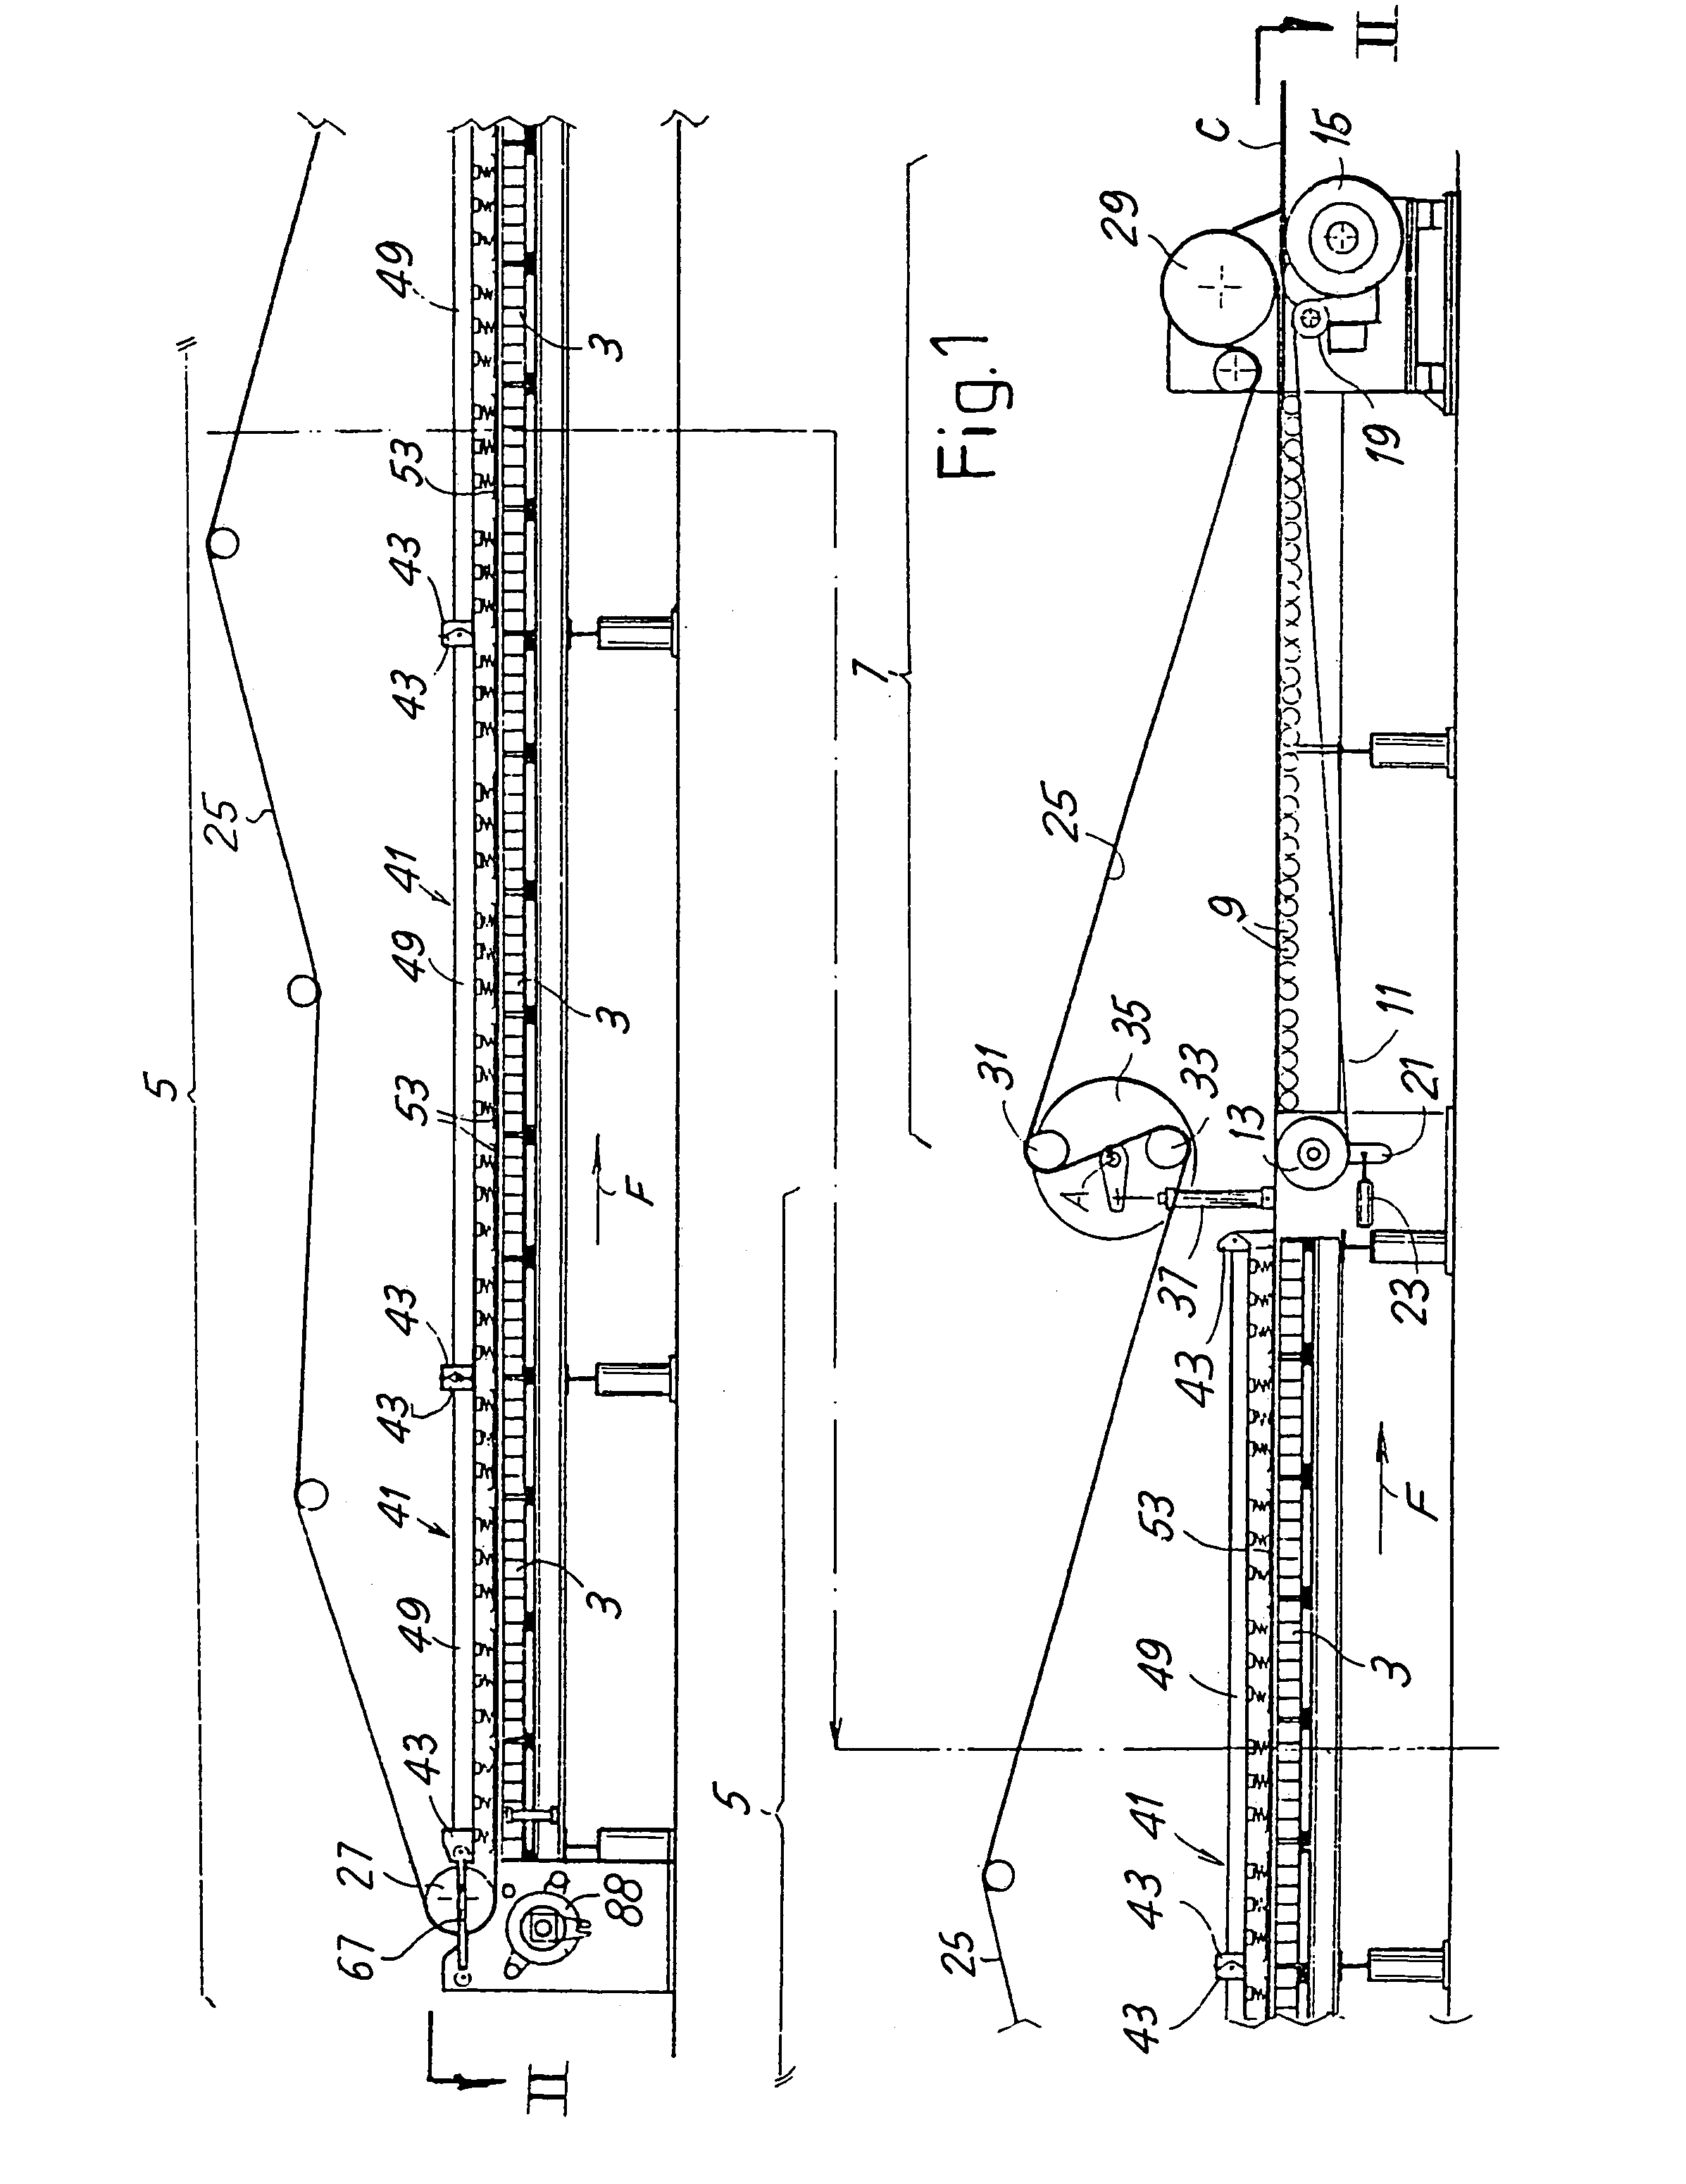 Device for joining sheets of cardboard to form corrugated cardboard